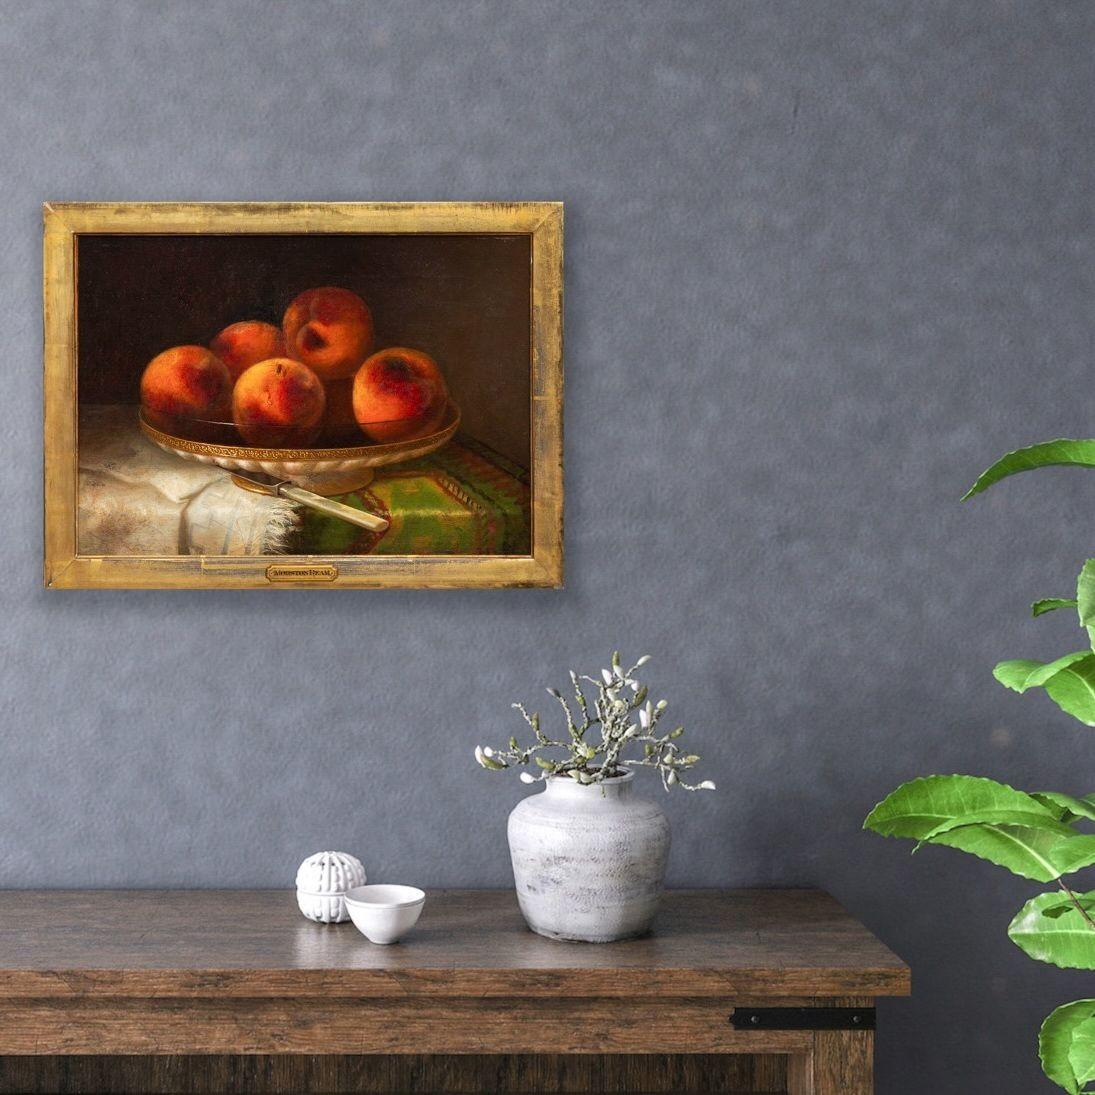 MORSTON CONSTANTINE REAM
United States, 1840-1898

Still Life of Six Peaches in a Porcelain and Glass Bowl with a Knife

Oil on canvas  unsigned  circa 1880

Item # 403EDF06S

An exquisite still-life rich with texture, color and brilliant use of